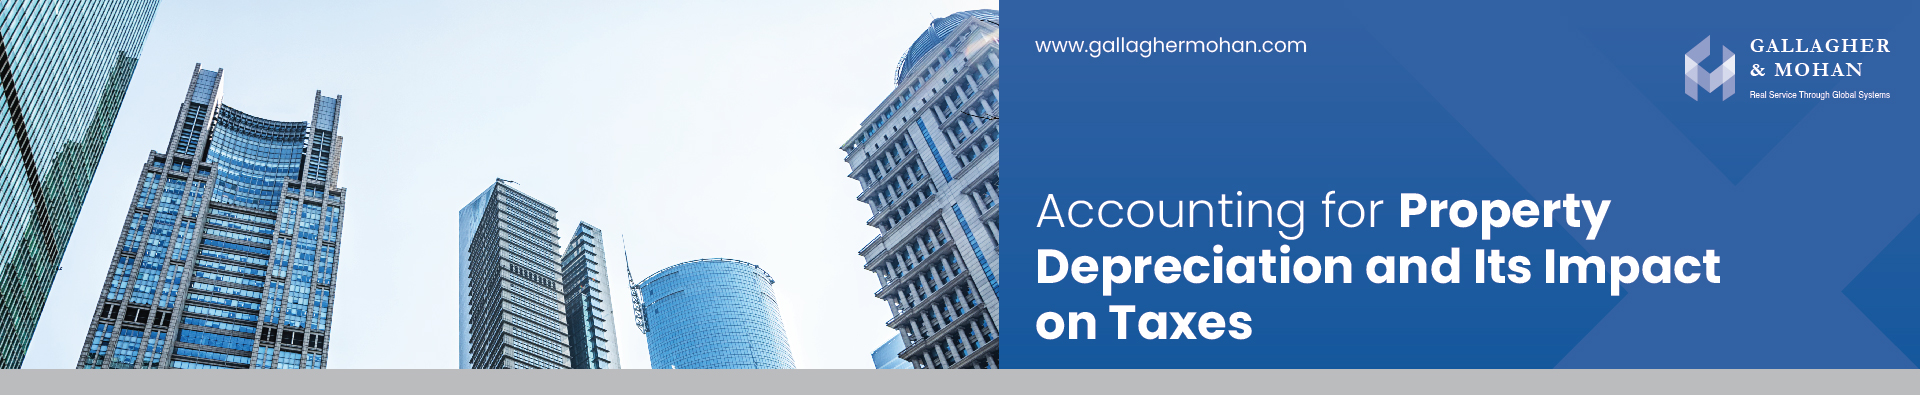 Accounting For Property Depreciation And Its Impact On Taxes